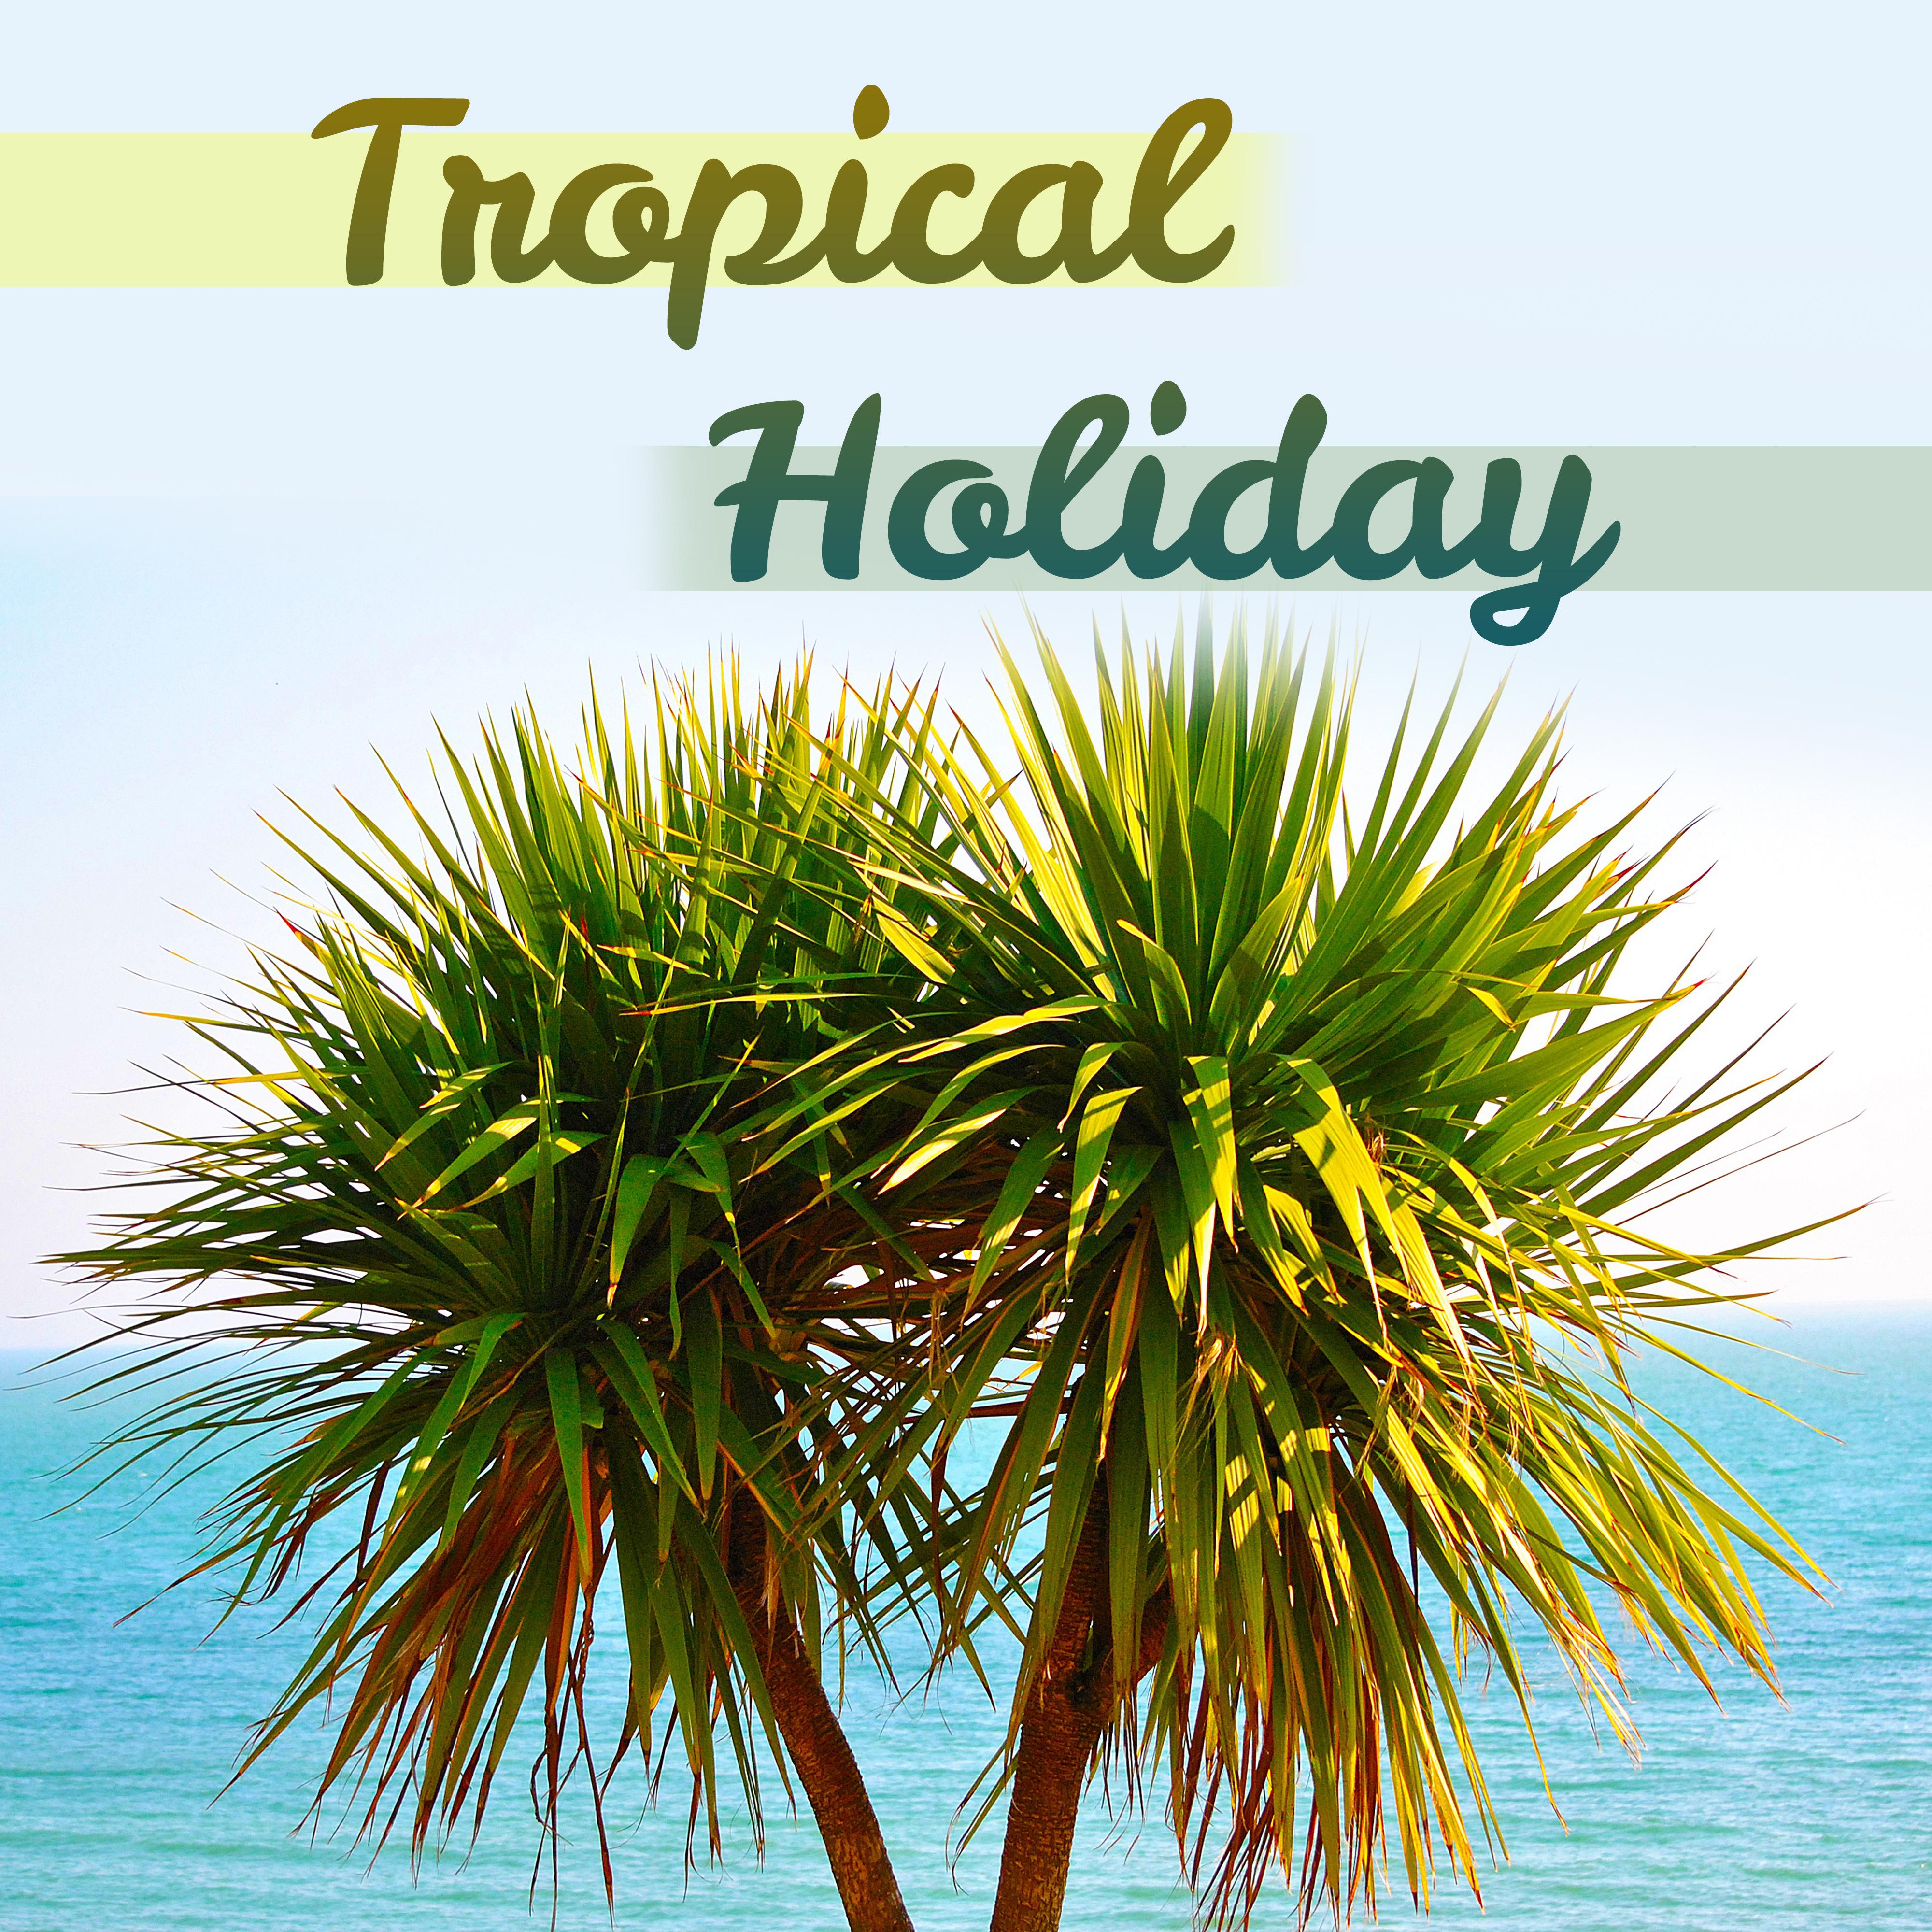 Tropical Holiday – Happy Chill Out Music, Deep Relaxation, Summer Chill, Relaxing Music, Positive Vibrations, Good Energy